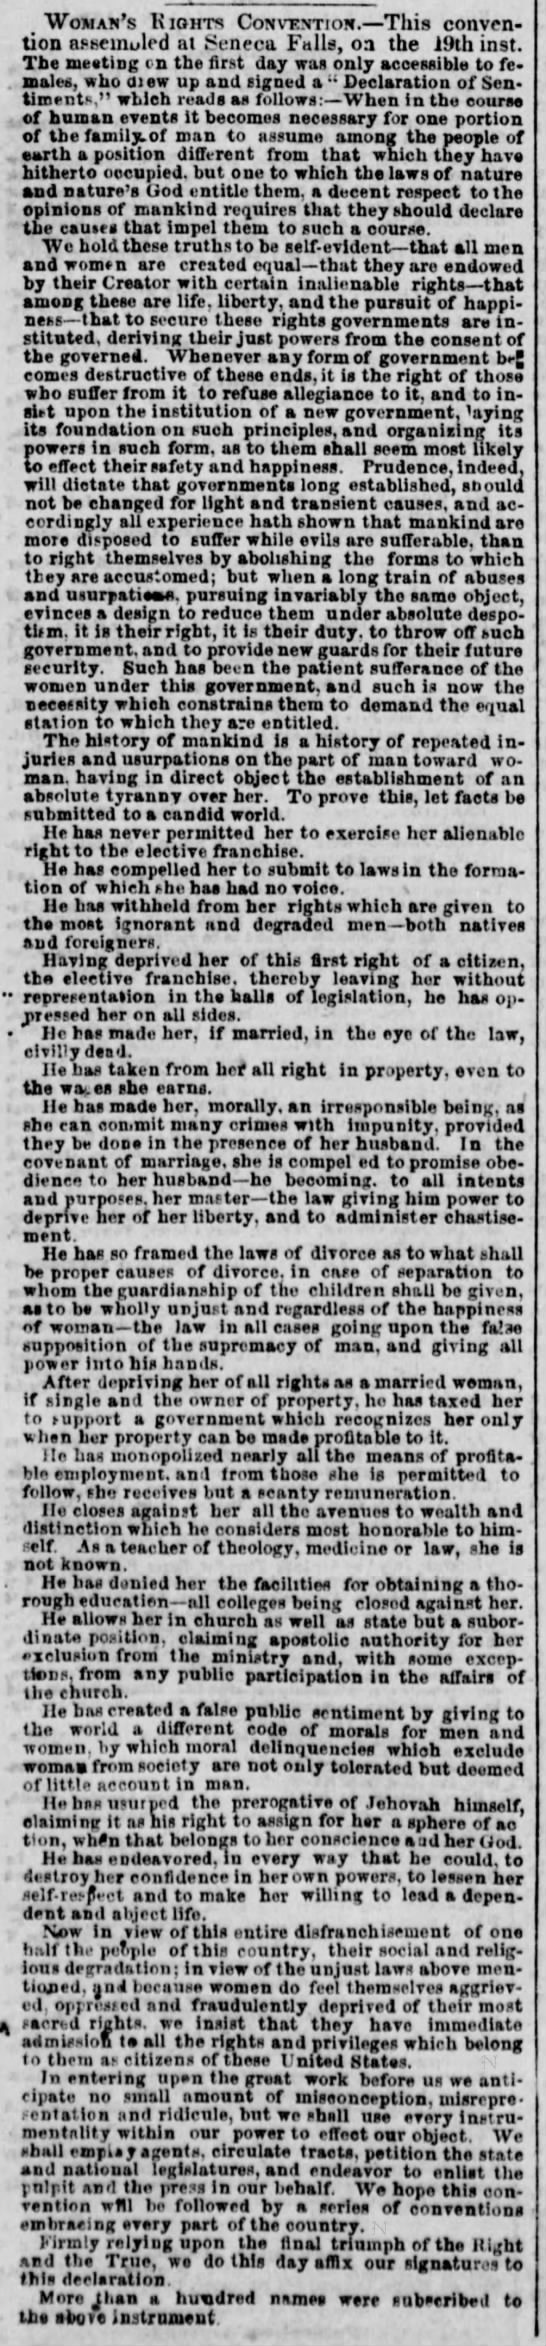 Newspaper publishes "Declaration of Sentiments" from the Seneca Falls Convention in 1848 - 